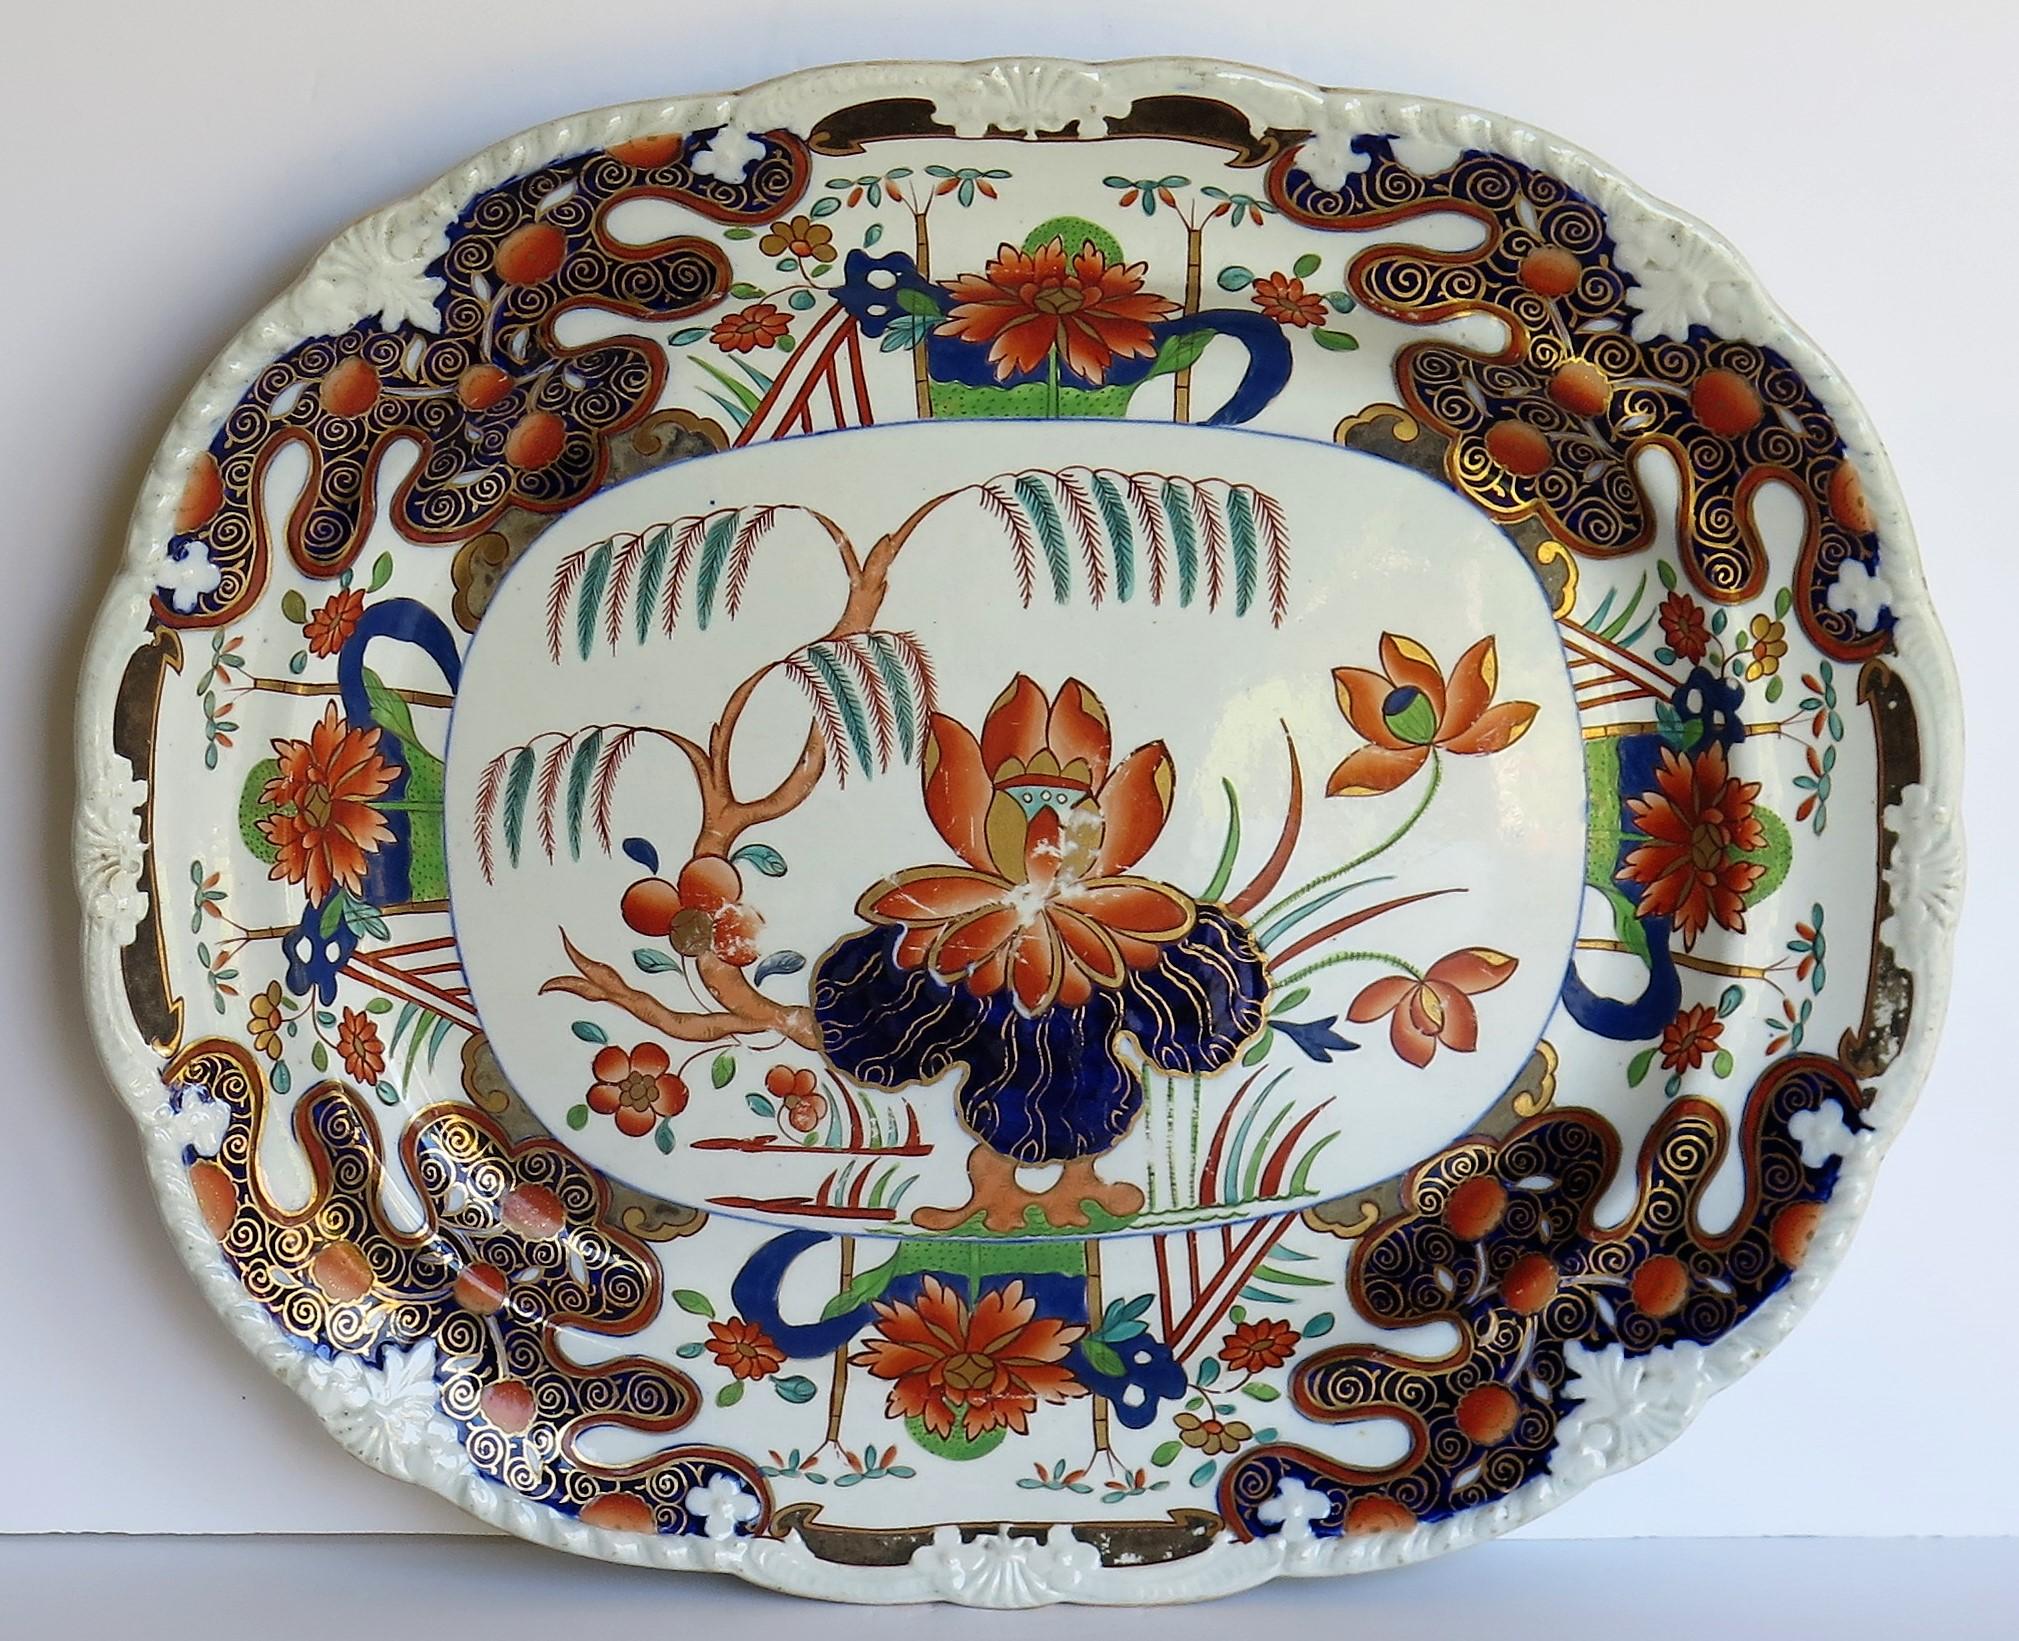 This is a beautifully hand painted large oval serving platter or meat dish in the rare Water Lily and Willow pattern by Mason's Ironstone, Lane Delph, England, dating to circa 1815.

The piece is well potted as an oval platter with a moulded edge